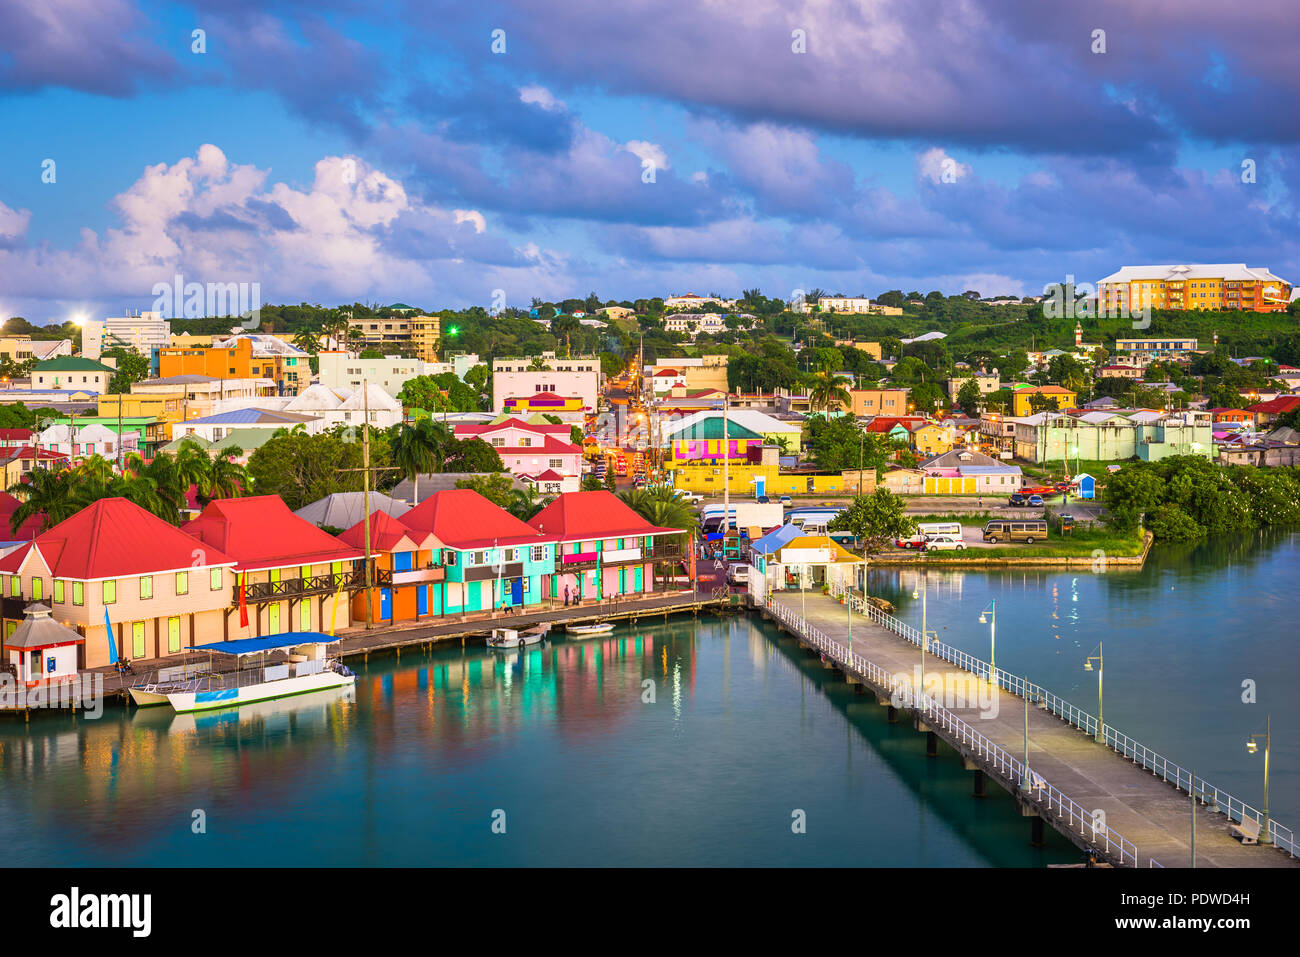 St. John's, Antigua and Barbuda cityscape over Redcliffe Quay at dusk. Stock Photo